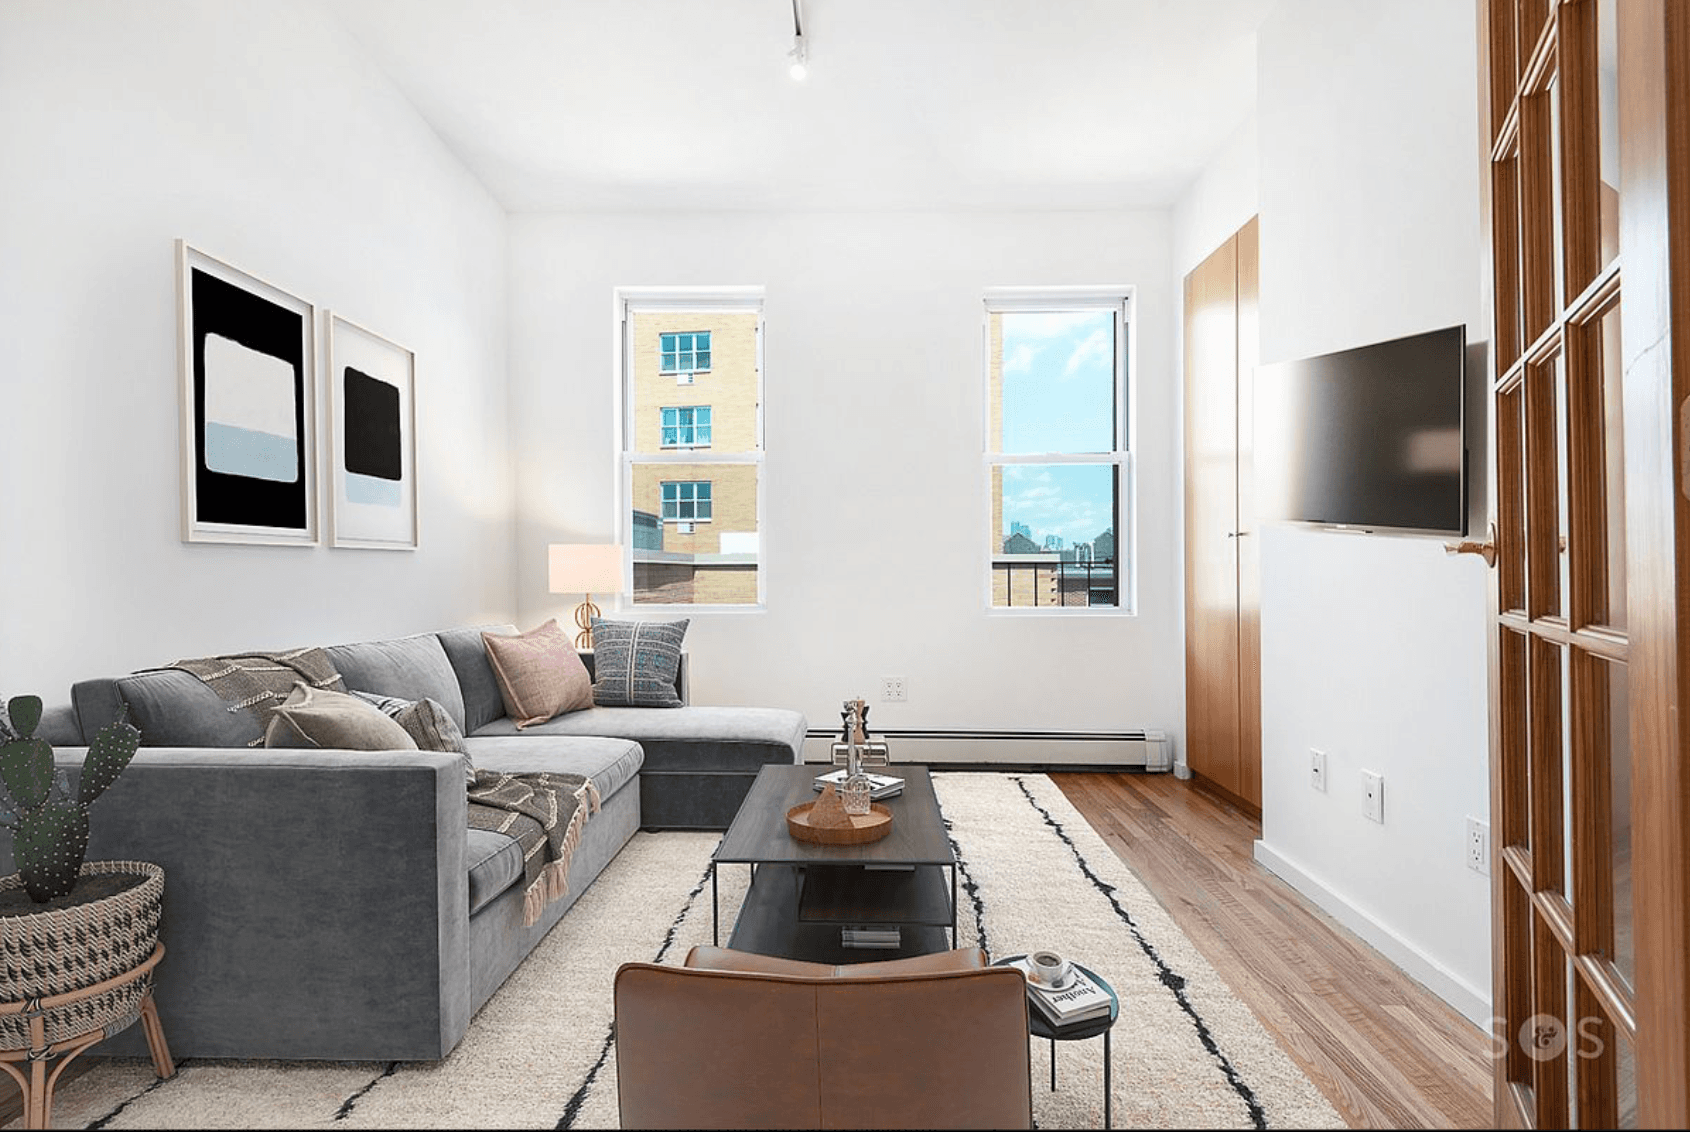 OUR OPINION This sun drenched gem was recently renovated, and features skylights, recessed lighting, loft like ceilings, and up to date finishes.